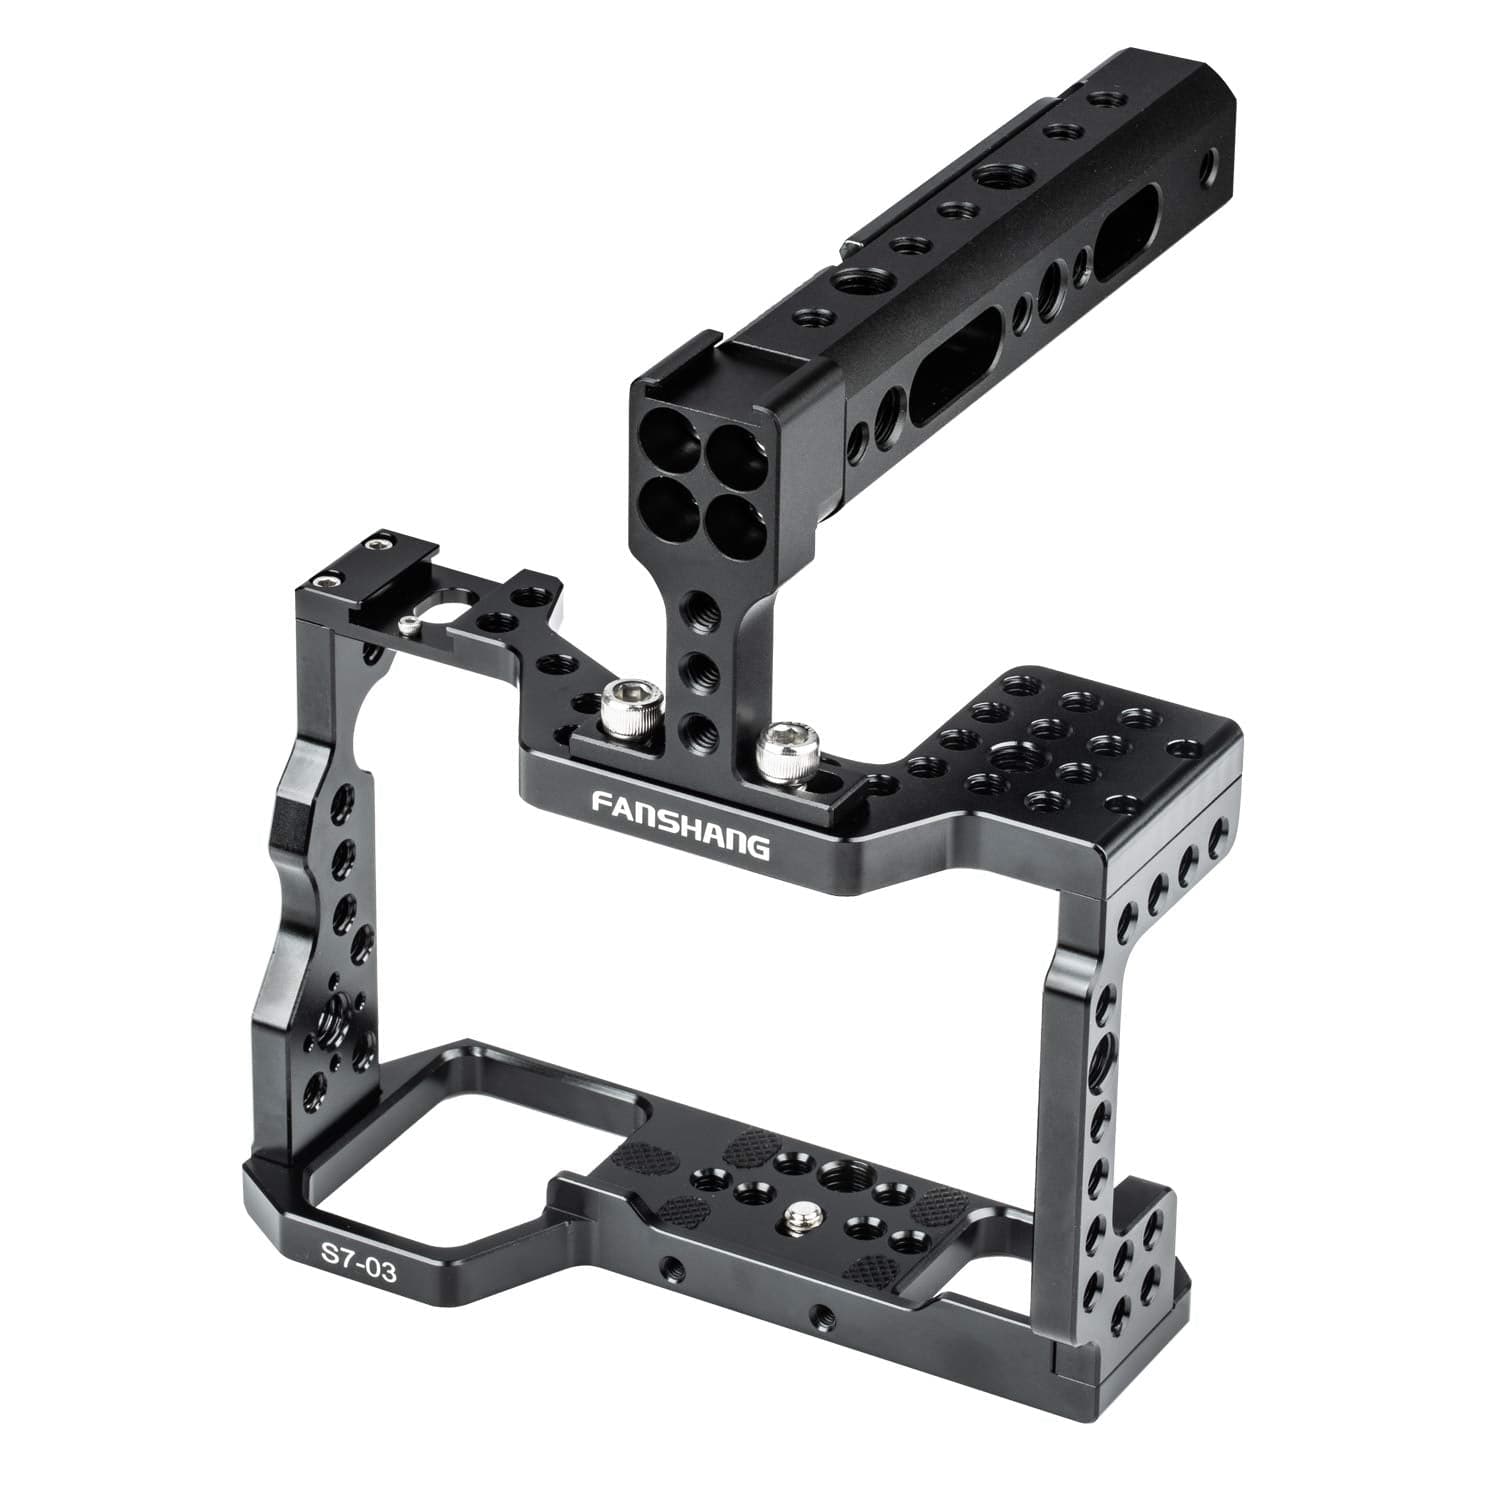 Viltrox FANSHANG Aluminum Camera Cage Film Movie Making Kit Rig Stabilizer+Top Handle Grip for Sony